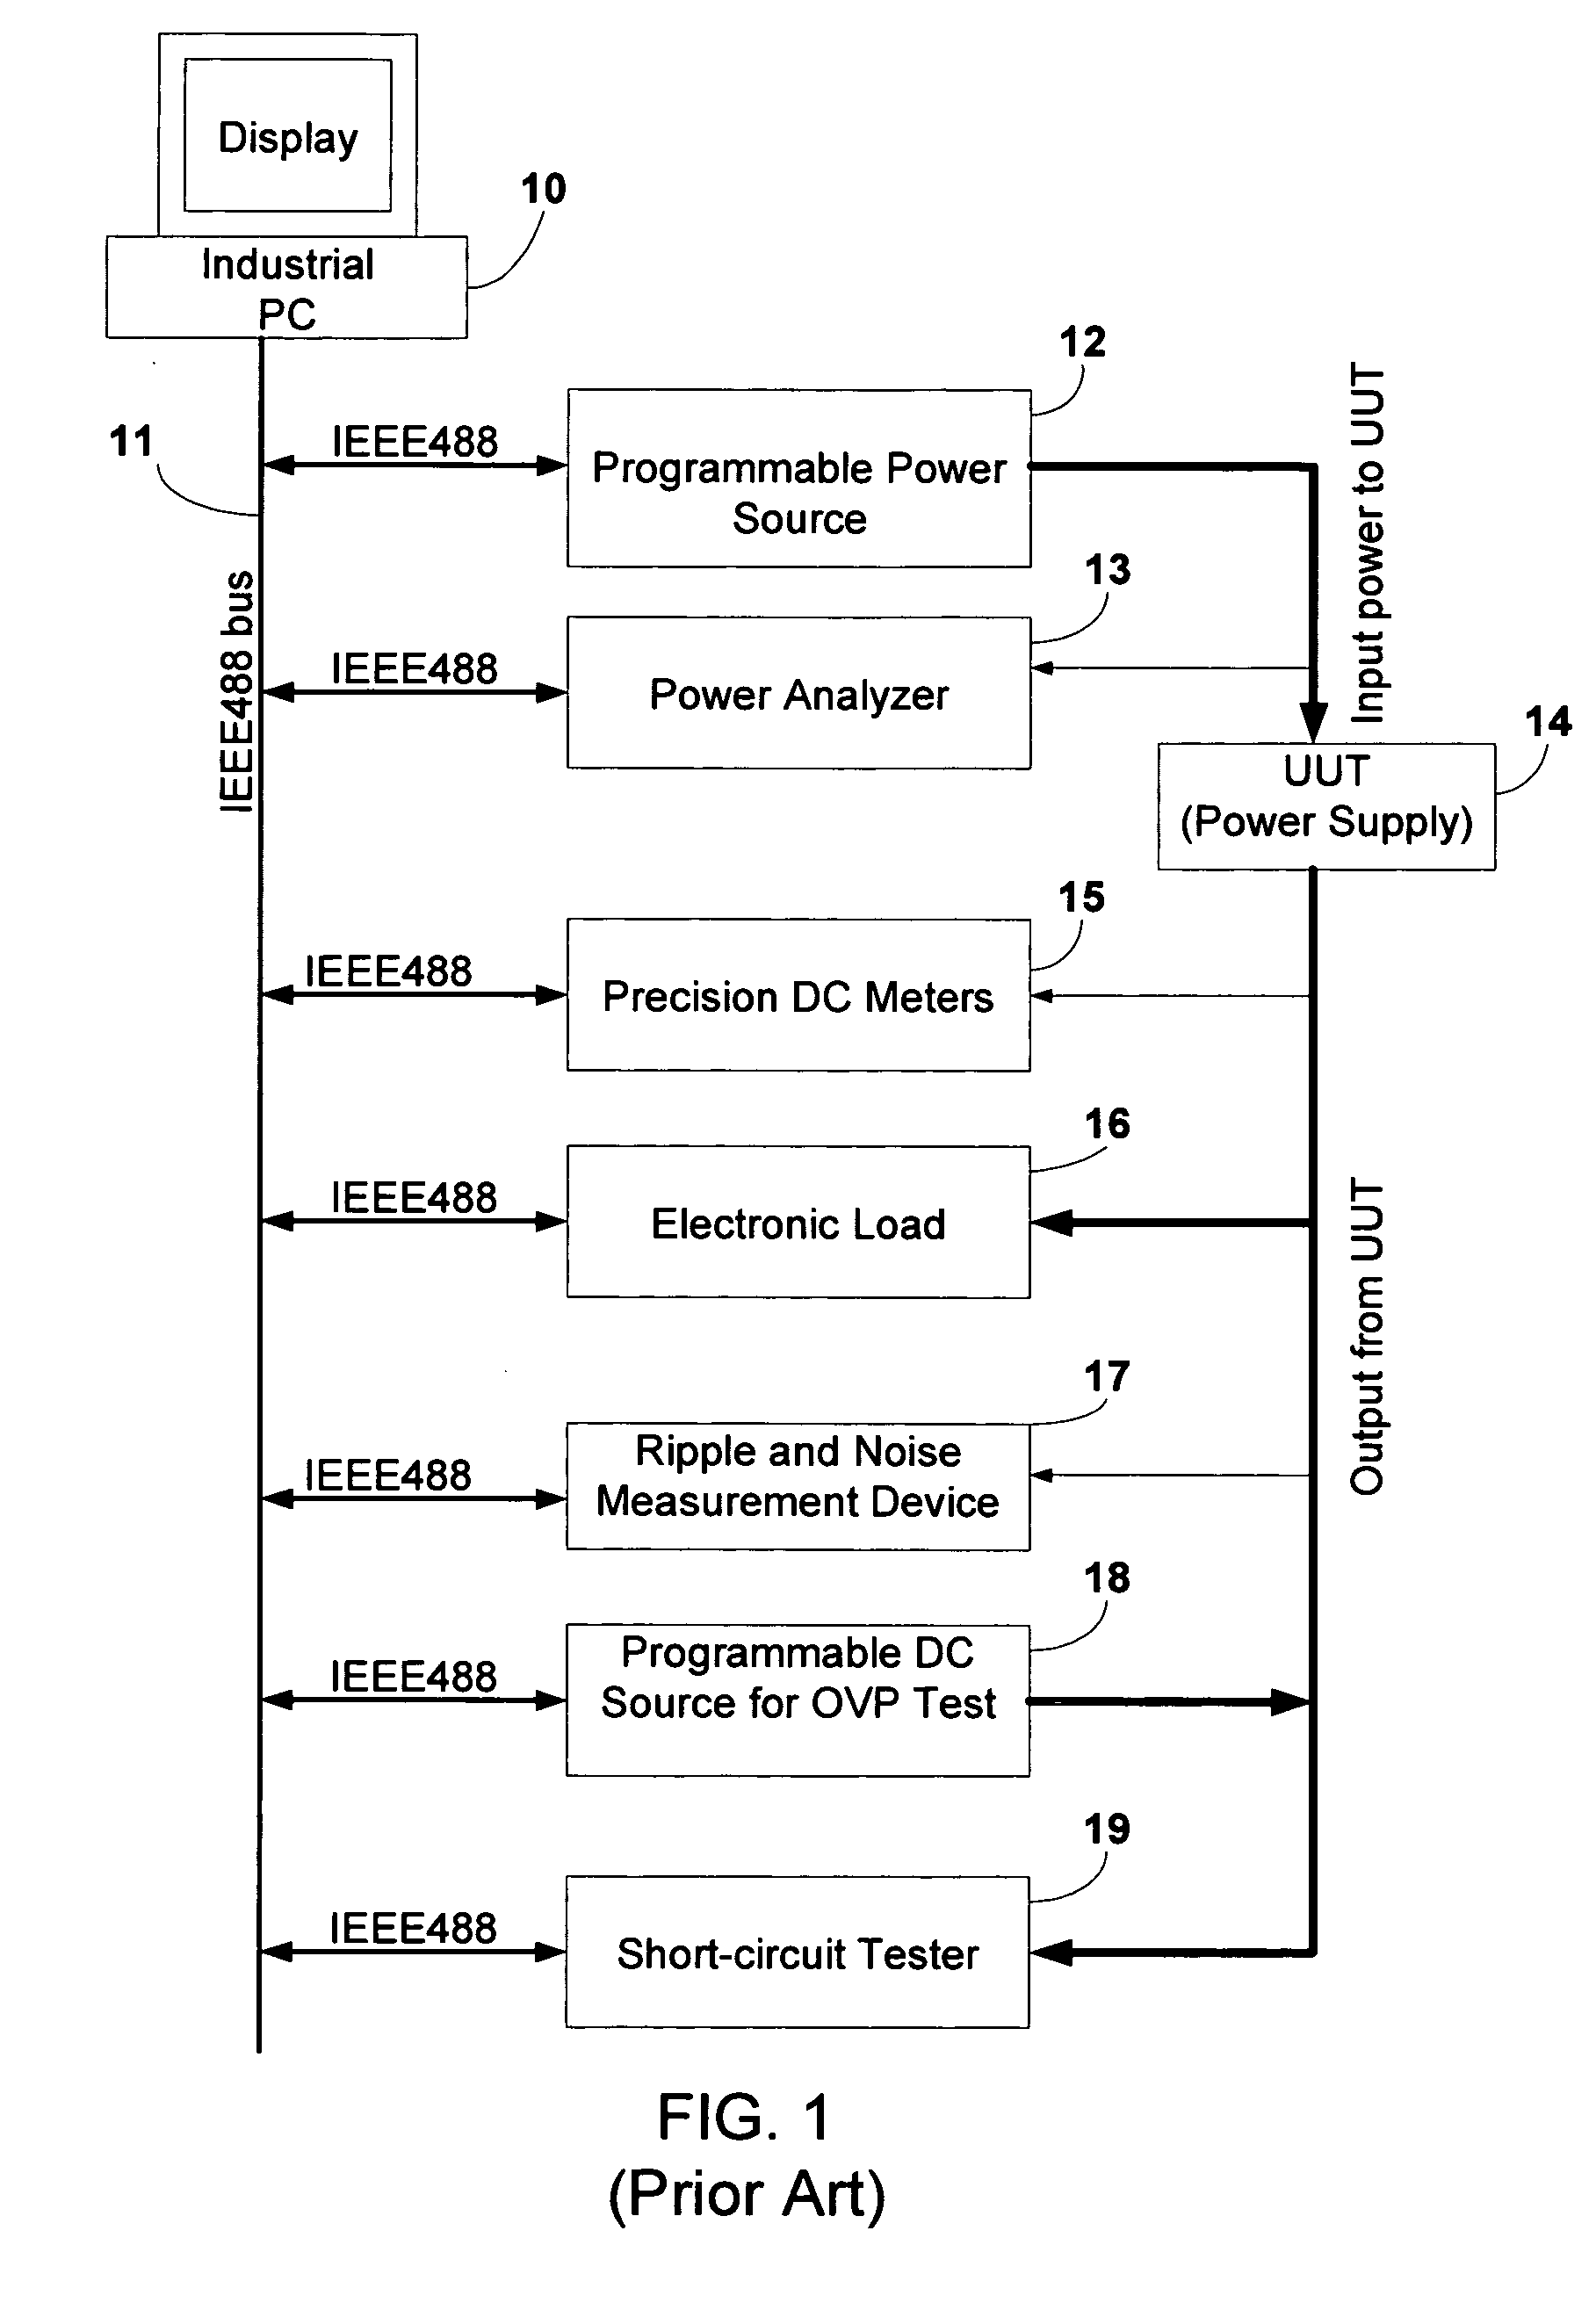 System architecture and apparatus for programmable automatic power supply testing